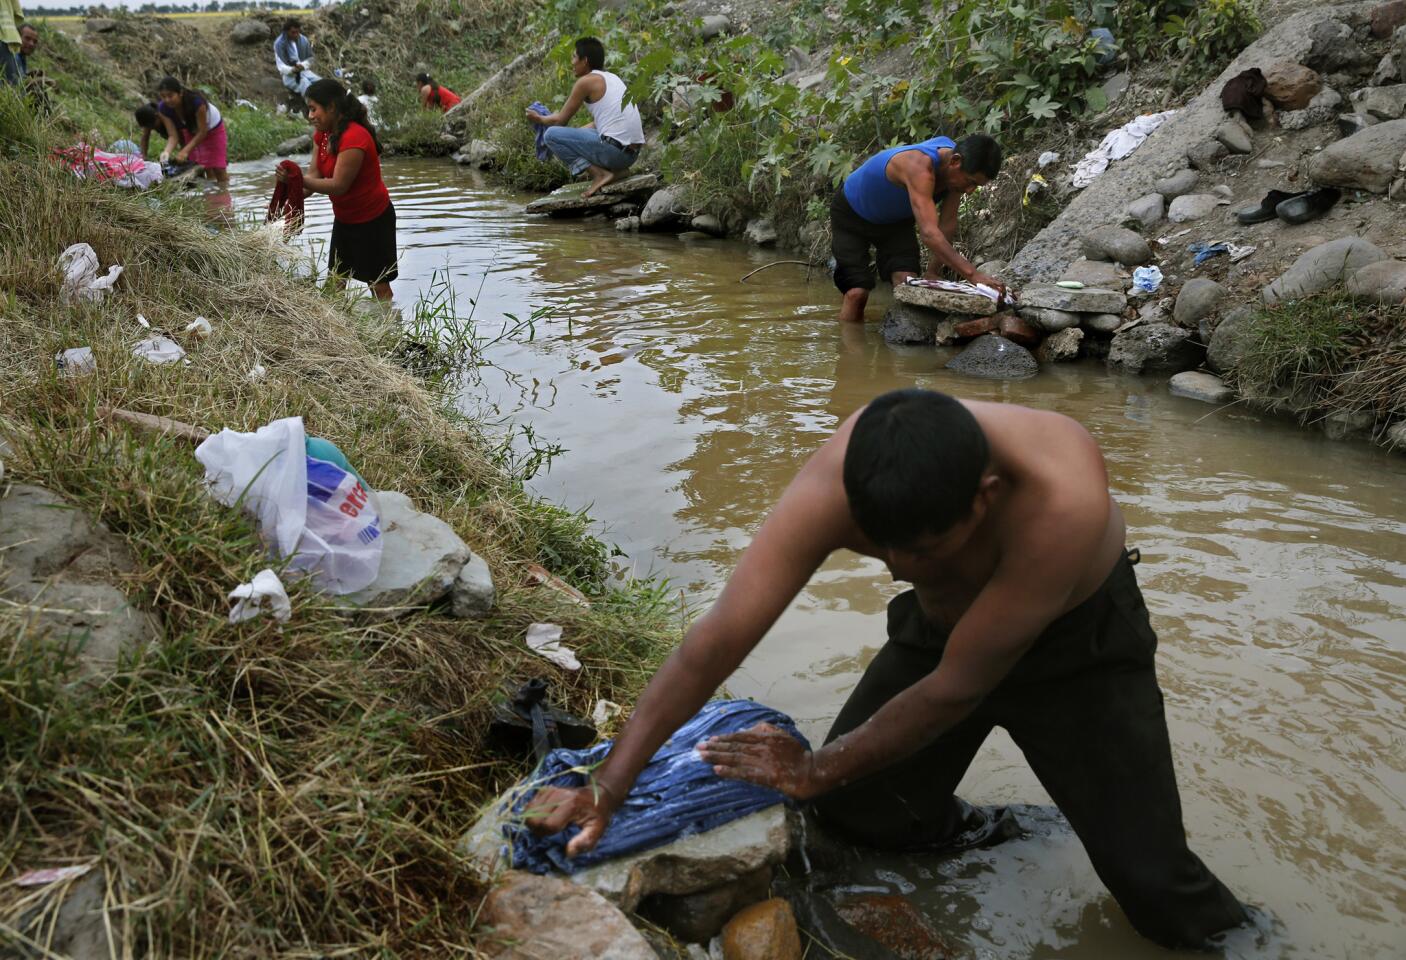 Luis Perez, 26 washes clothes after bathing in an irrigation canal outside Campo San Jose. He says people use the canal because water inside the camp runs out or the pressure is too low in the faucets. Snakes have been known to slither by bathers.